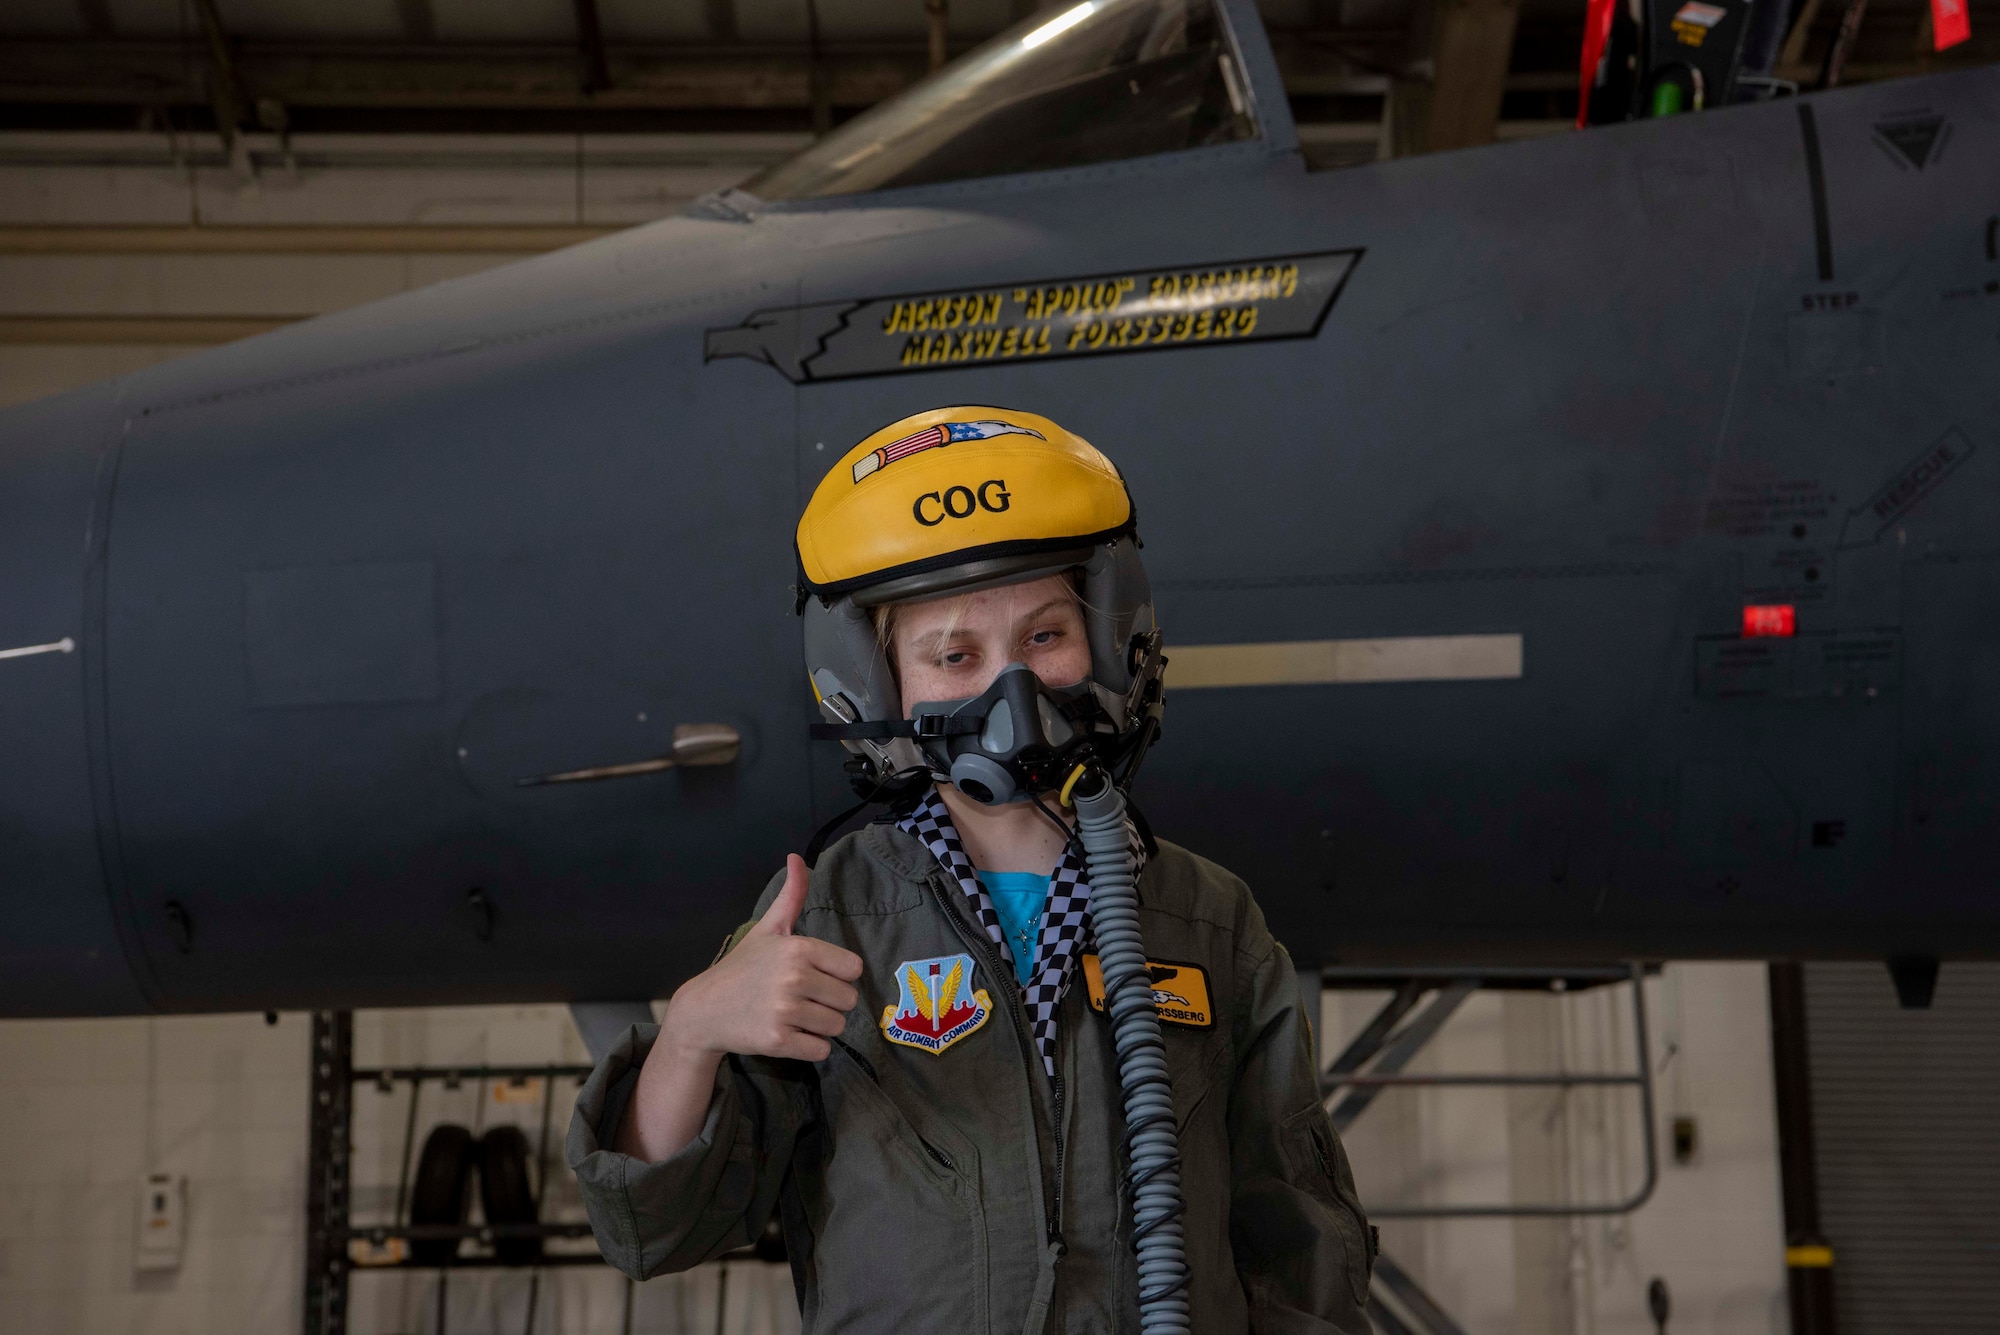 Jackson Forrsberg gives a thumbs up during the Pilot for a Day program at Seymour Johnson Air Force Base, North Carolina, June 17, 2021